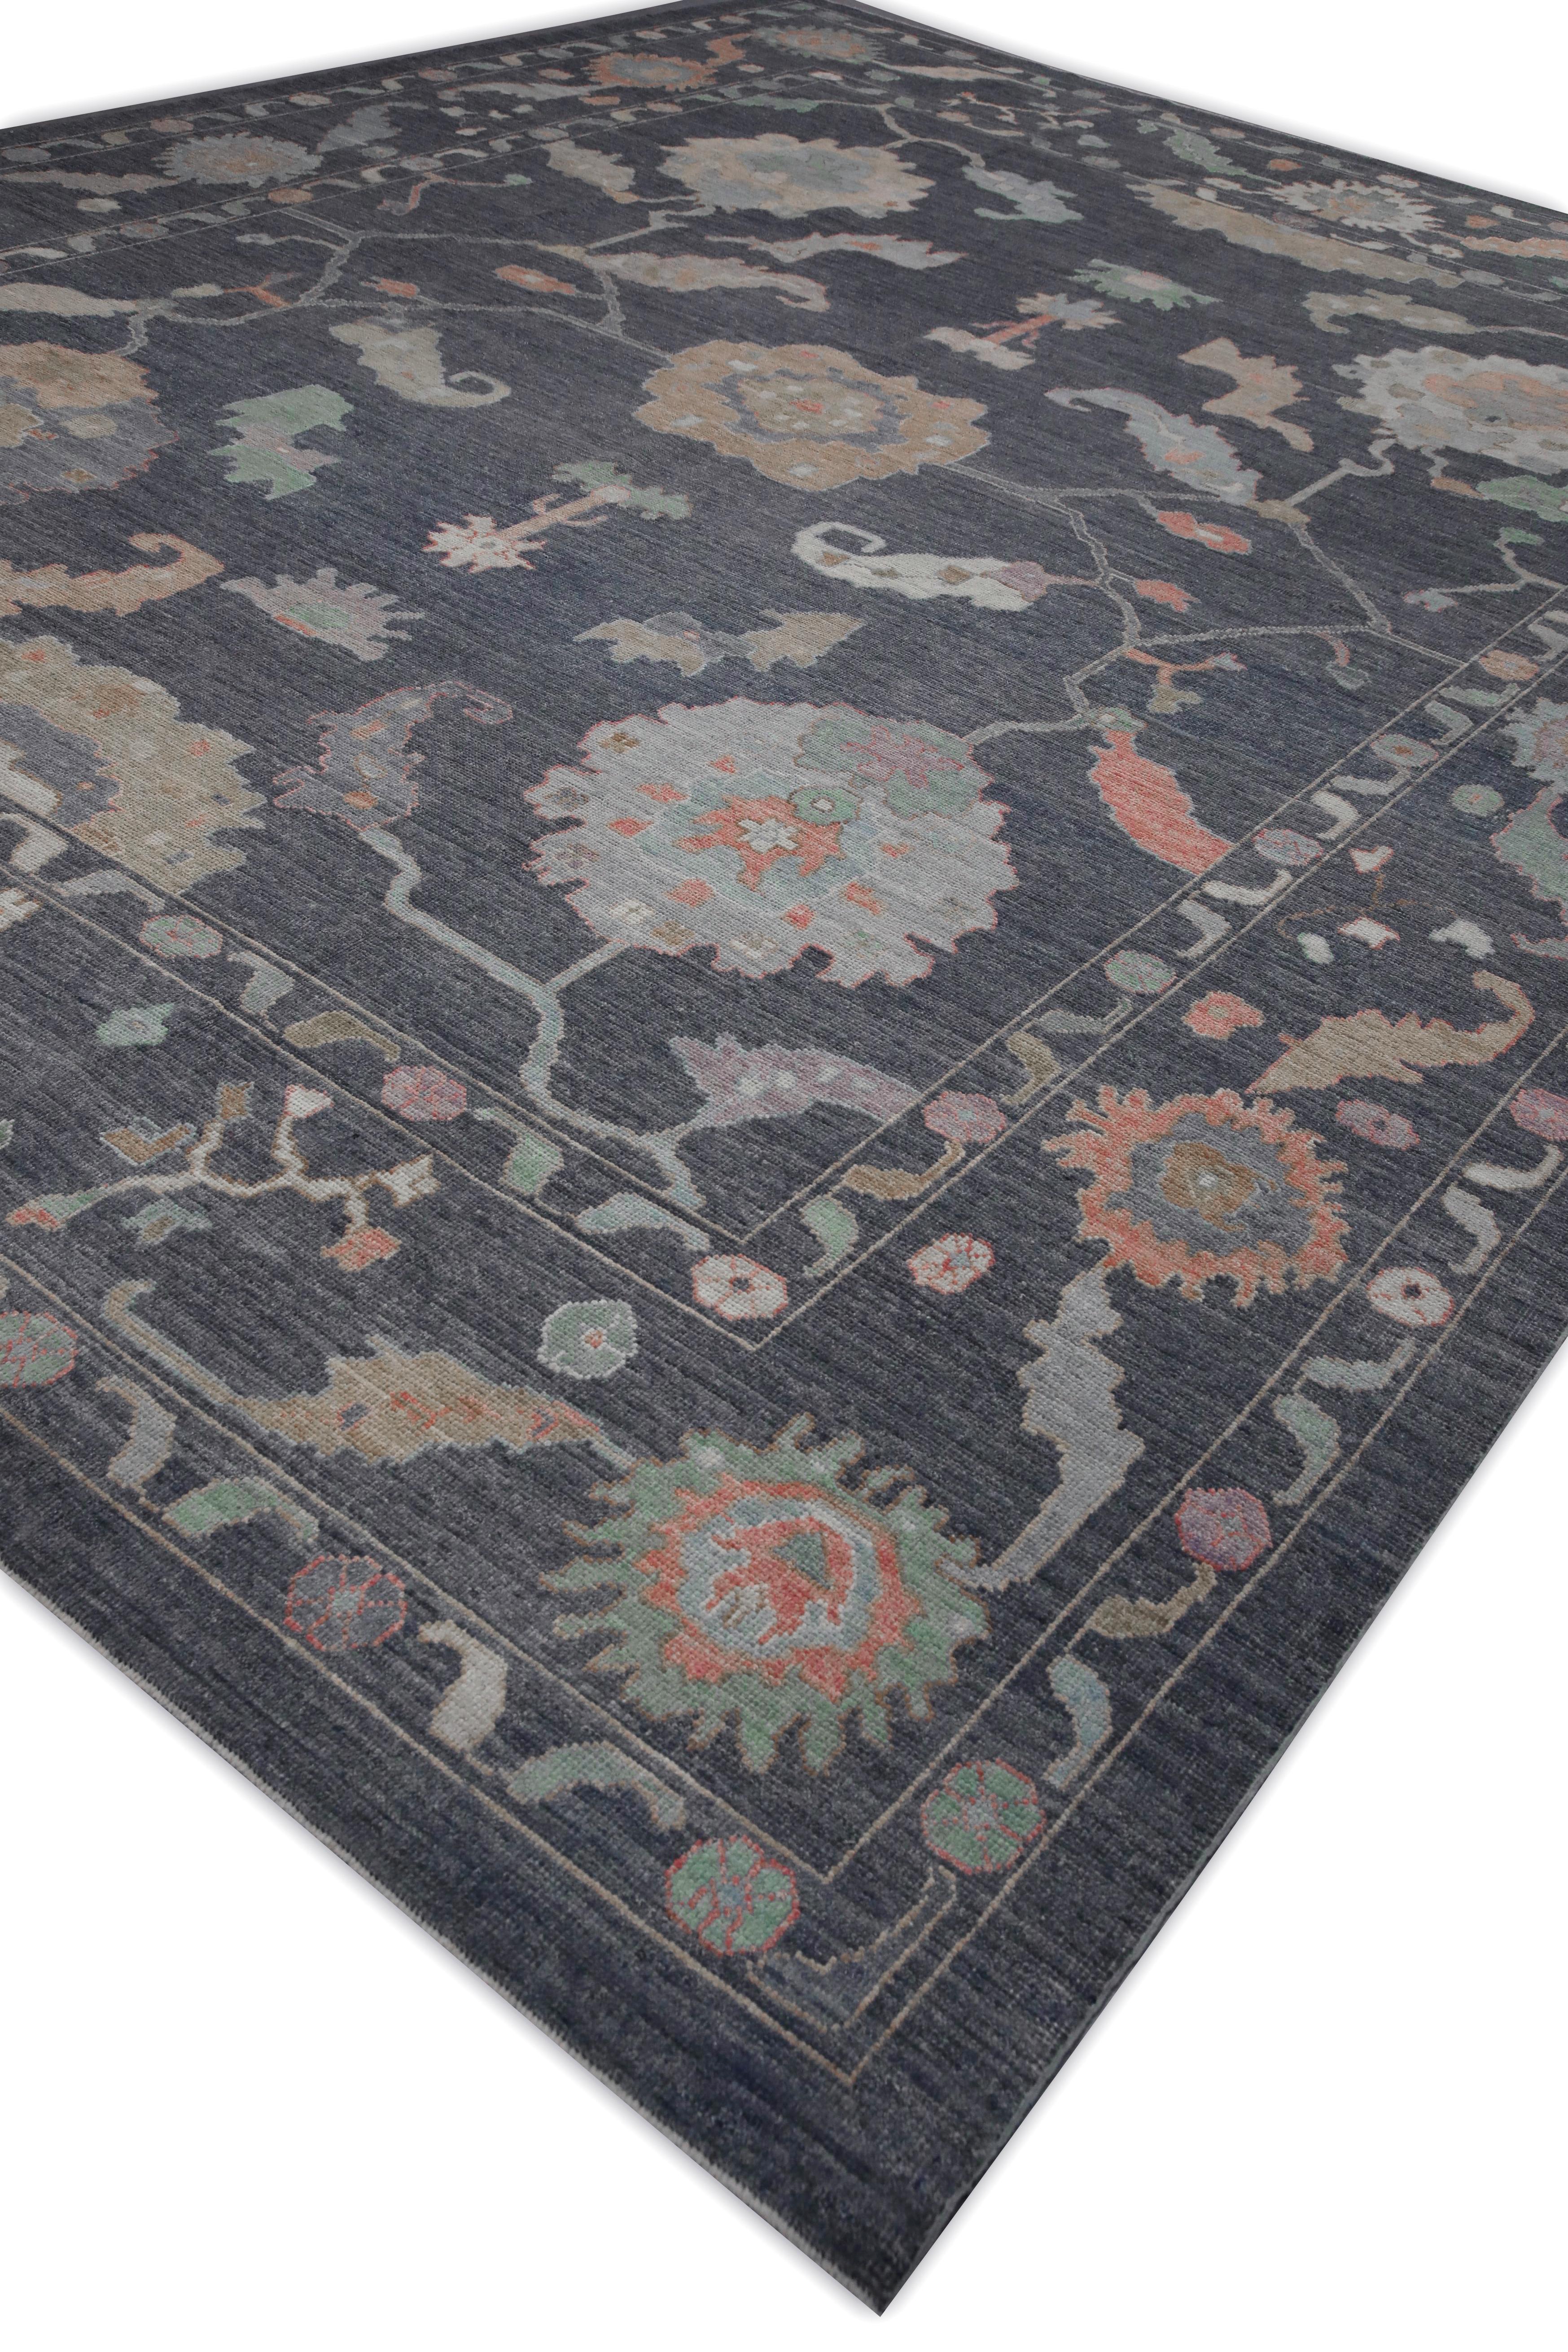 Contemporary Charcoal Colorful Floral Design Handwoven Wool Turkish Oushak Rug 12' X 15'